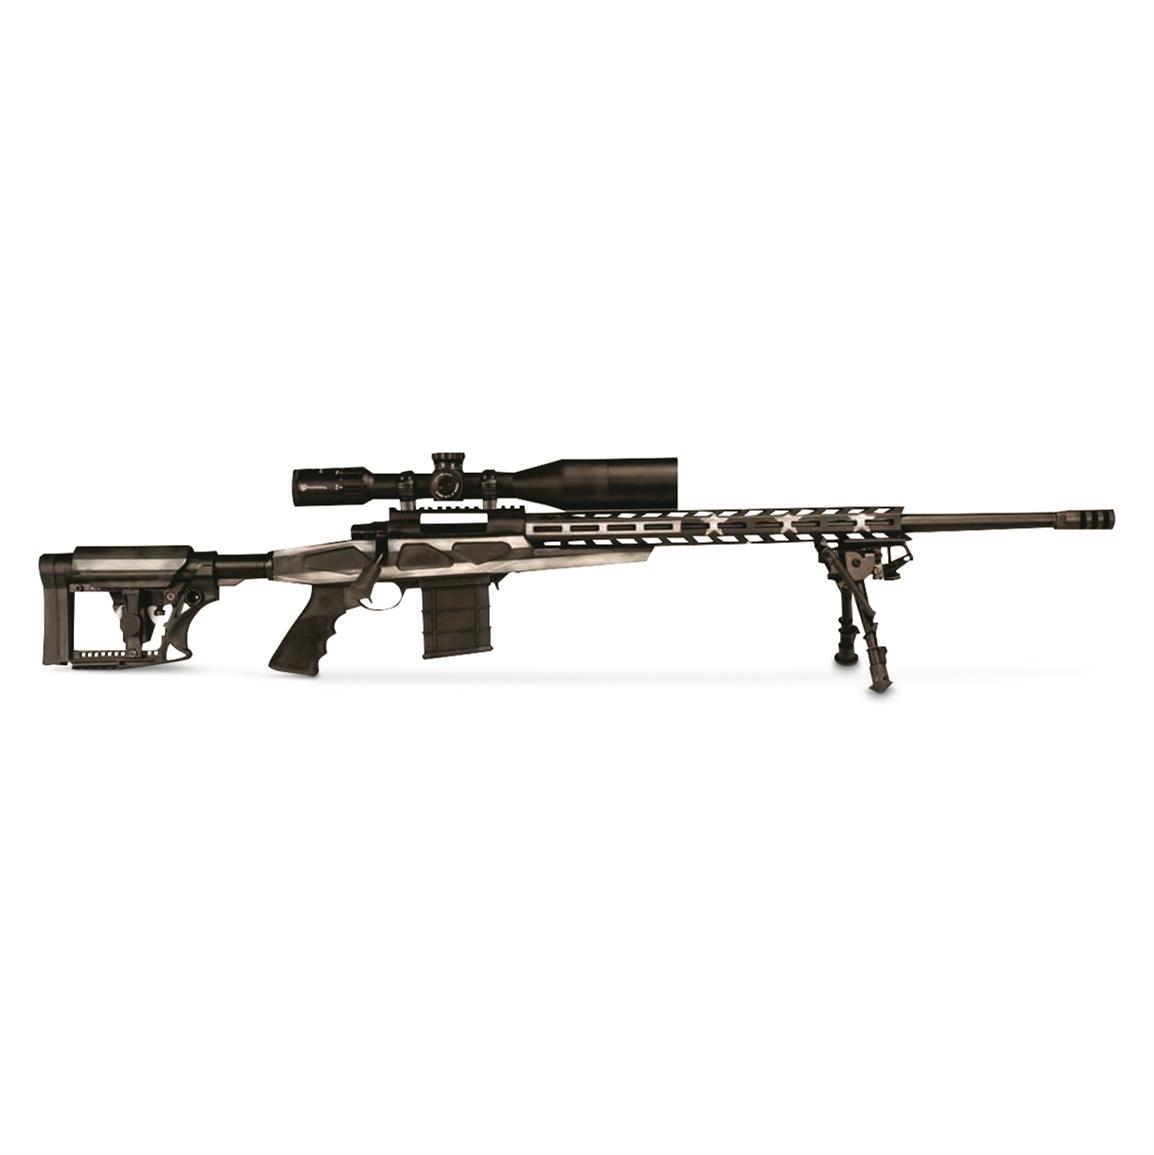 LSI Howa APC Chassis Rifle, Bolt Action, 6.5mm Creedmoor, 24" Barrel, Gray Flag, 10+1 Rds.